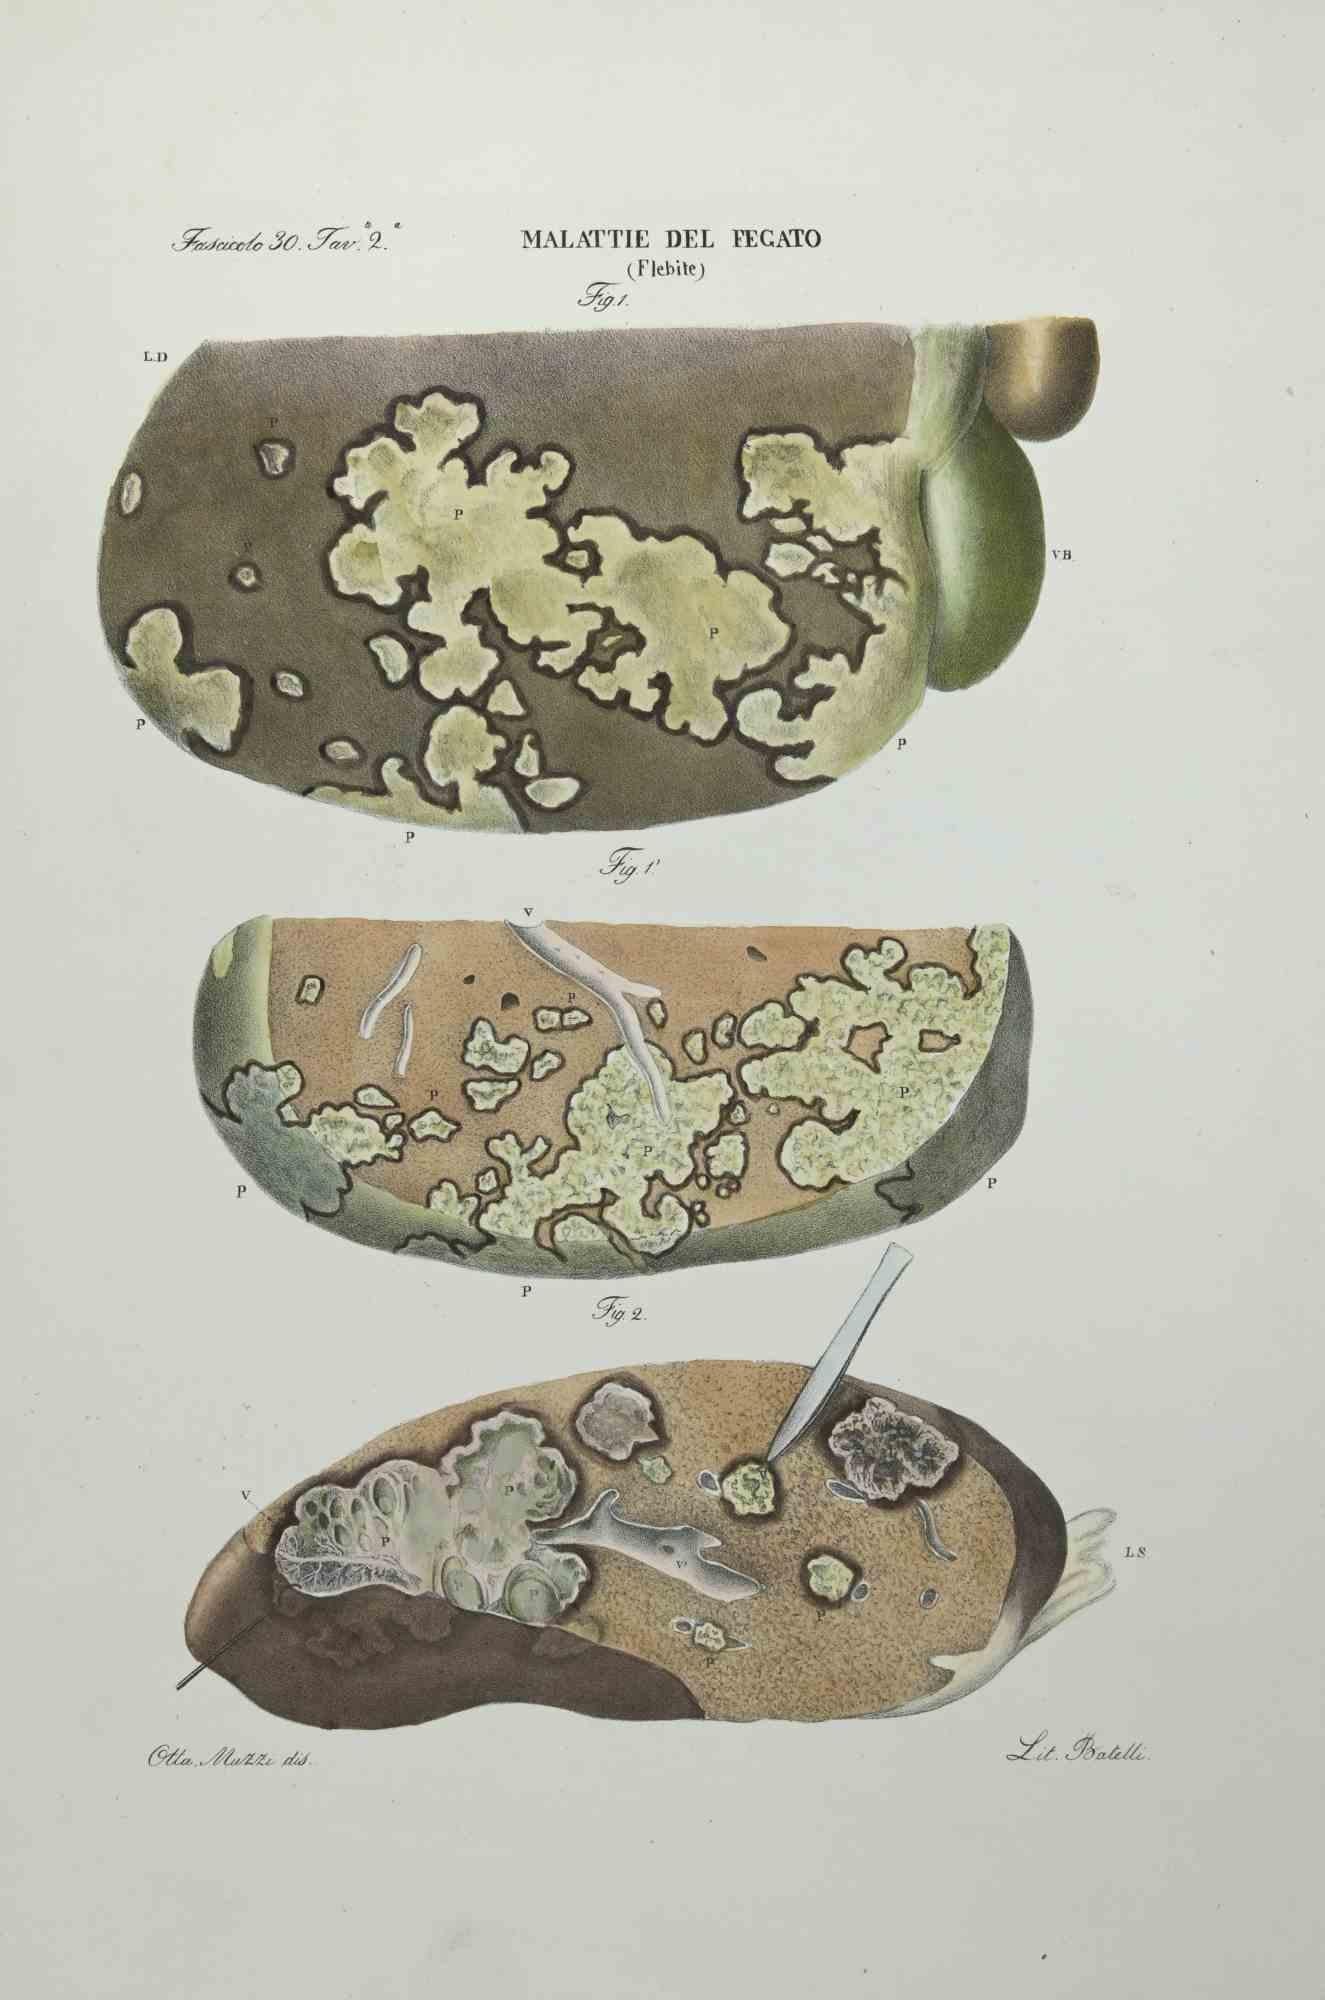 Liver Diseases is a lithograph hand colored by Ottavio Muzzi for the edition of Antoine Chazal,Human Anatomy, Printers Batelli and Ridolfi, realized in 1843.
Signed on plate on the lower left margin. 

The artwork belongs to the "Atlante Generale